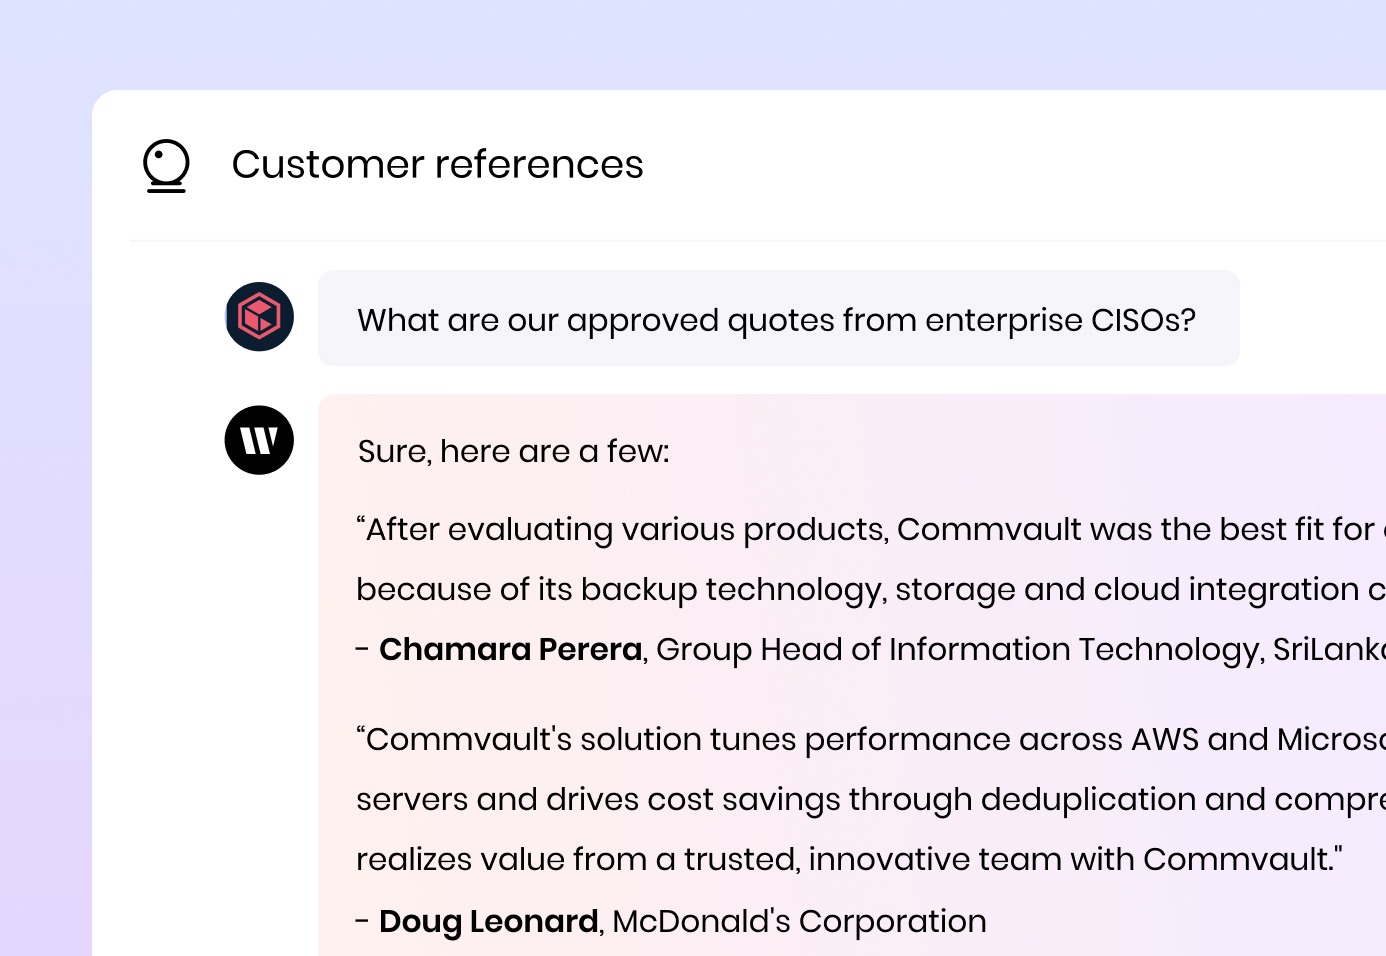 Customer references

What are our approved quotes from enterprise CISOs?

Writer's response: Sure, here are a few:

“After evaluating various products, Commvault was the best fit for our environment because of its backup technology, storage and cloud integration capability." - Chamara Perera, Group Head of Information Technology, SriLankan Airlines

“Commvault's solution tunes performance across AWS and Microsoft Azure cloud servers and drives cost savings through deduplication and compression. McDonald's realizes value from a trusted, innovative team with Commvault." - Doug Leonard, McDonald's Corporation